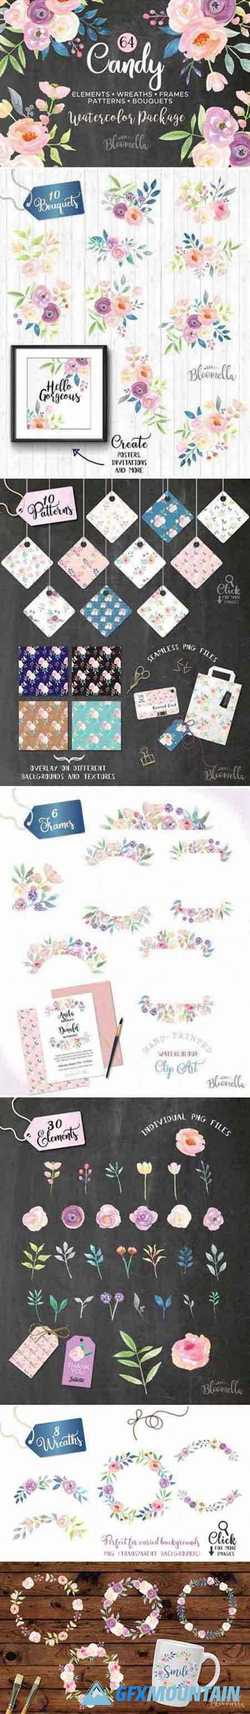 Candy Pastel Watercolor Flower Pack 2227773